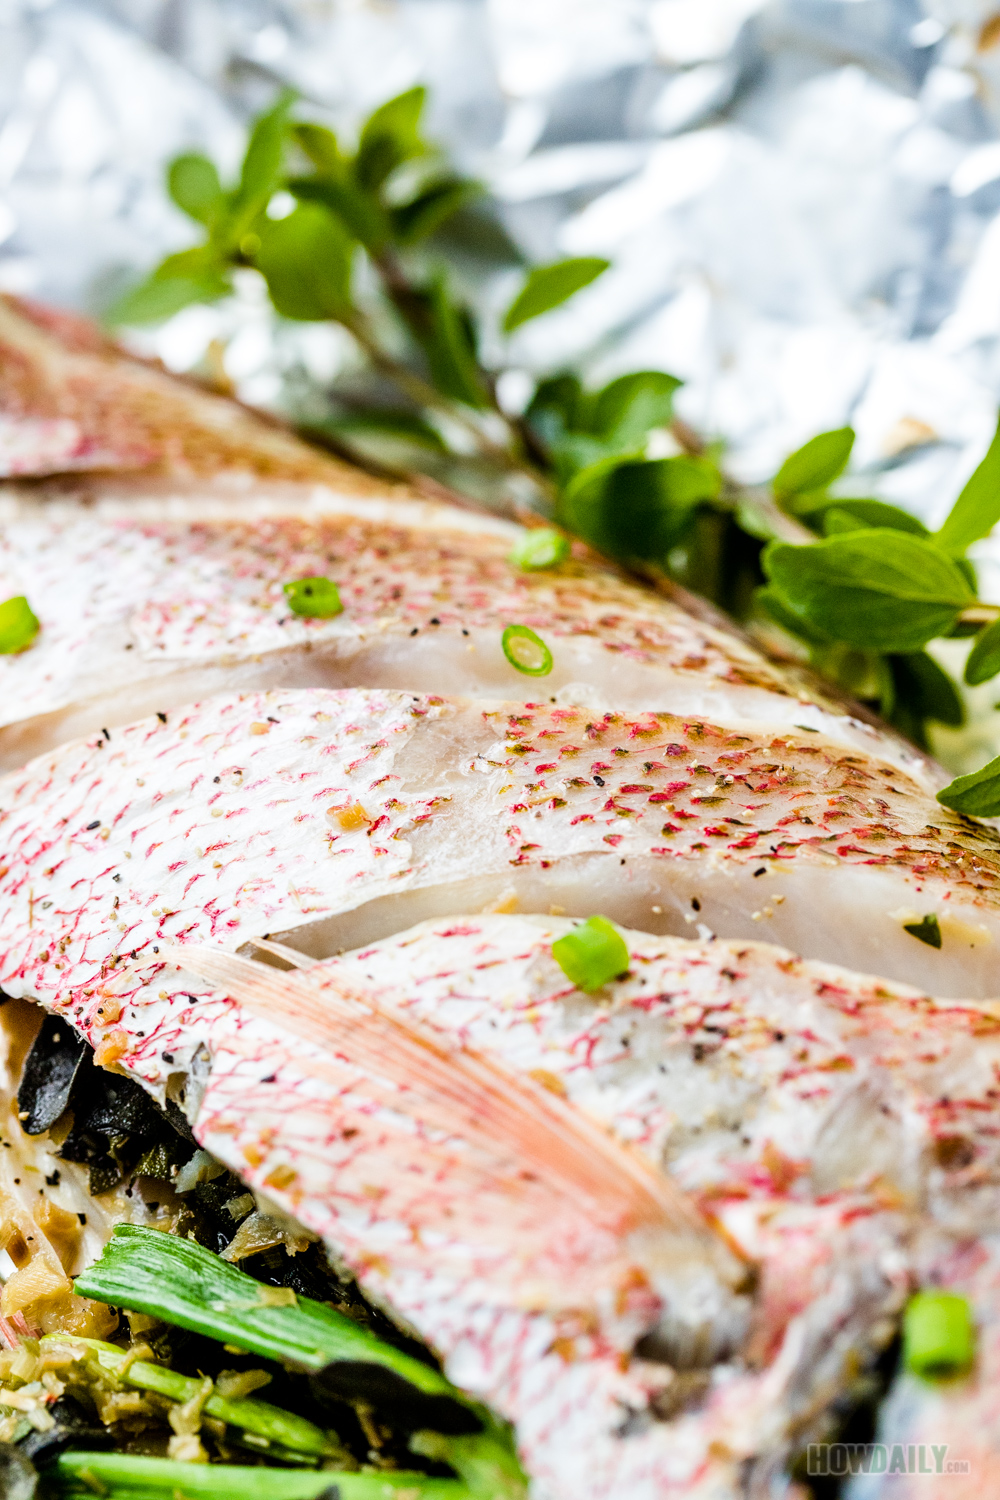 Oven Baked Whole Red Snapper with Seasoning Herb Recipe